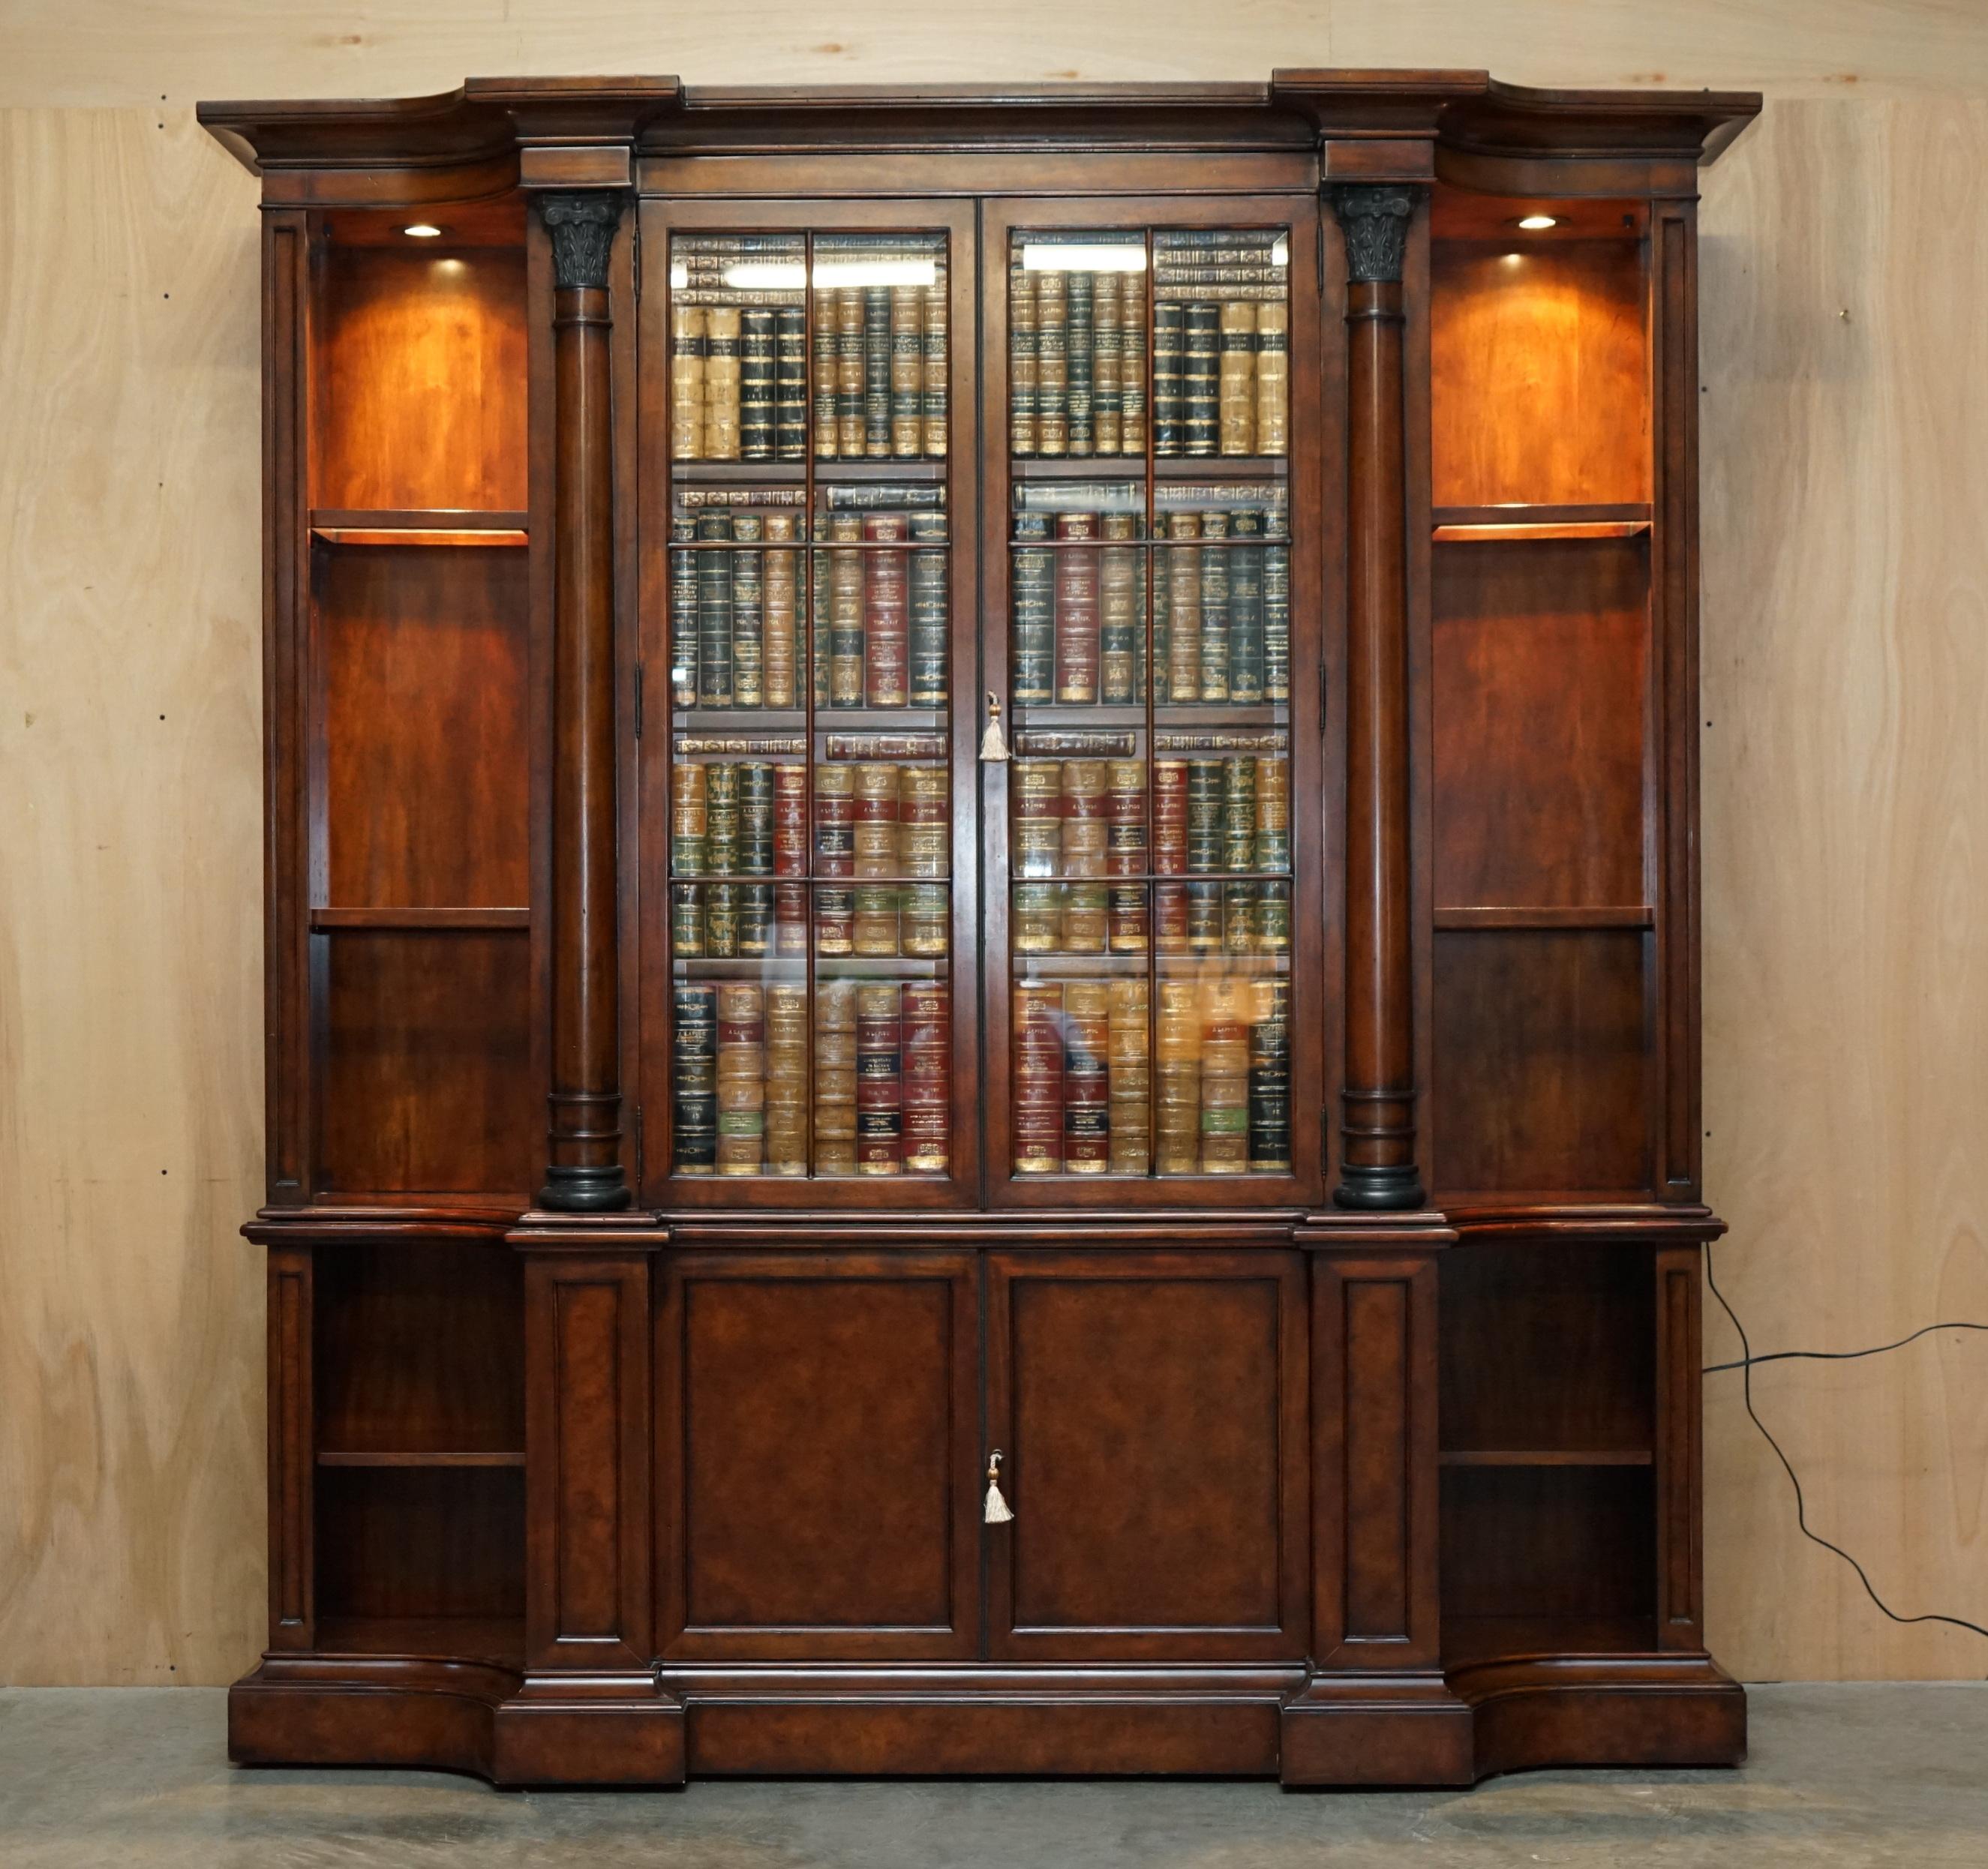 Royal House Antiques

Royal House Antiques is delighted to offer for sale this very rare, now discontinued, RRP £20,000 Theodore Alexander Faux book fronted library bookcase with spot lights in Laurel Burl

Please note the delivery fee listed is